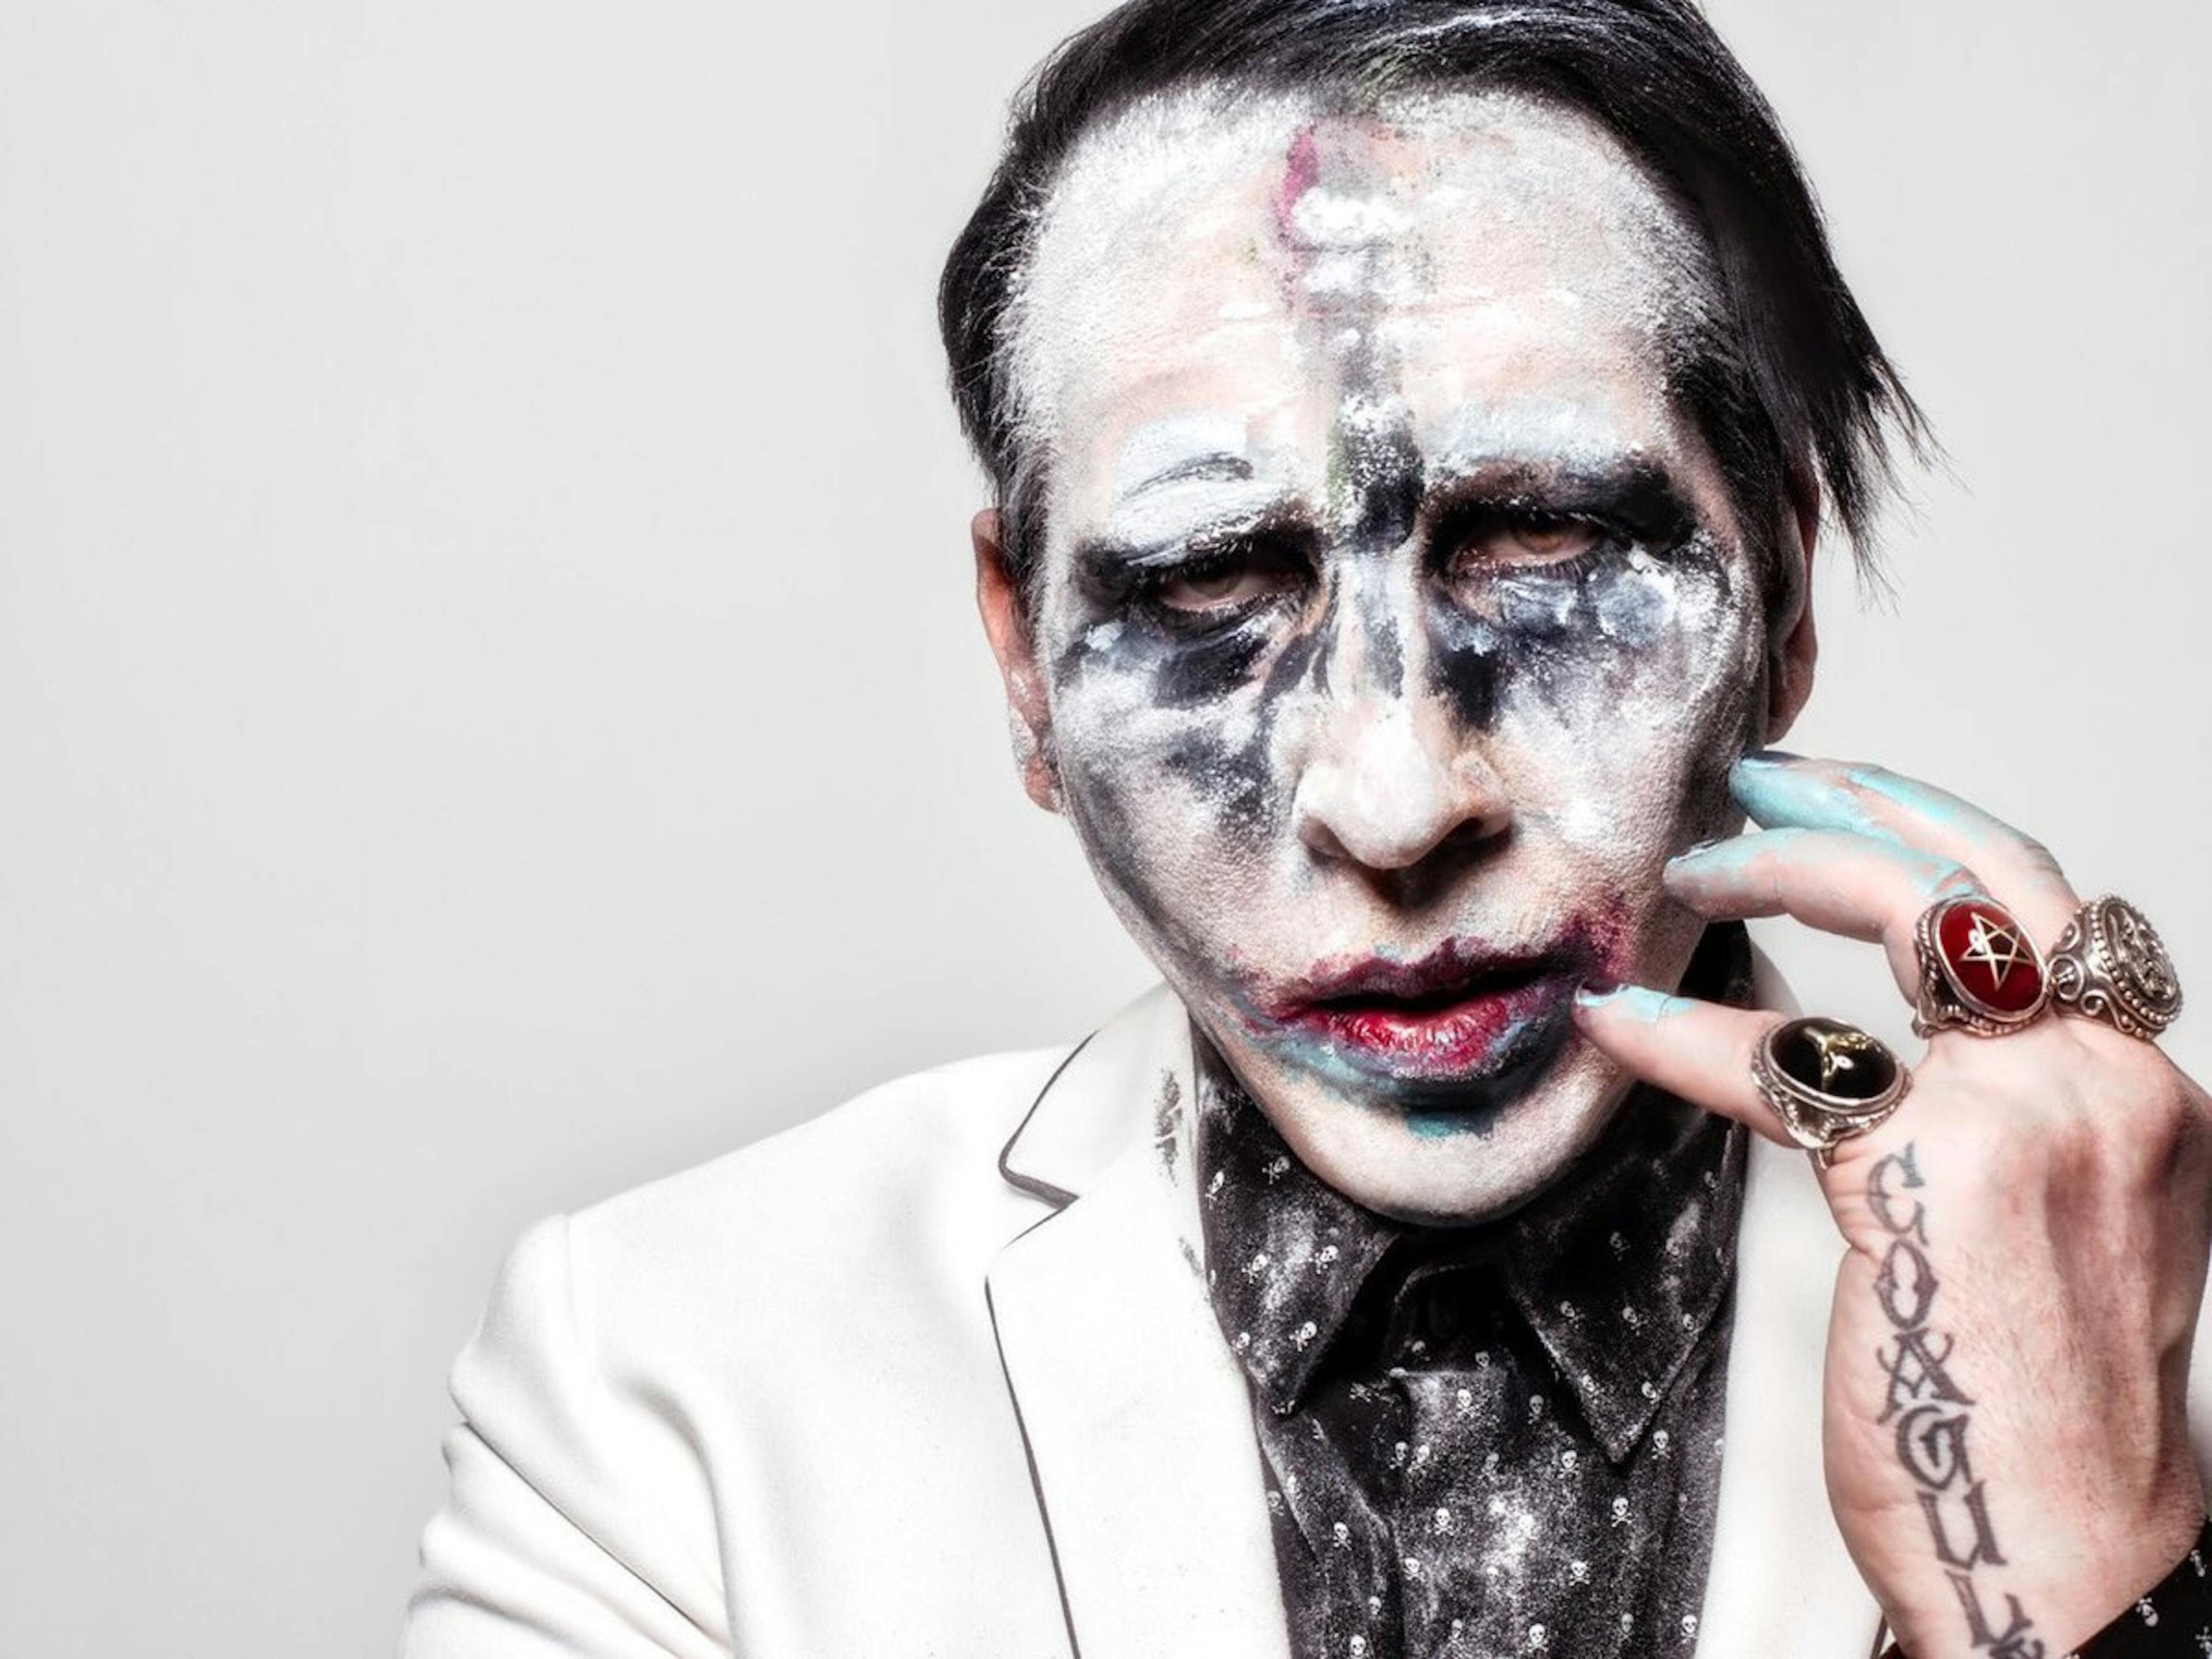 Marilyn Manson Struck By Falling Stage Scenery, Rushed To Hospital